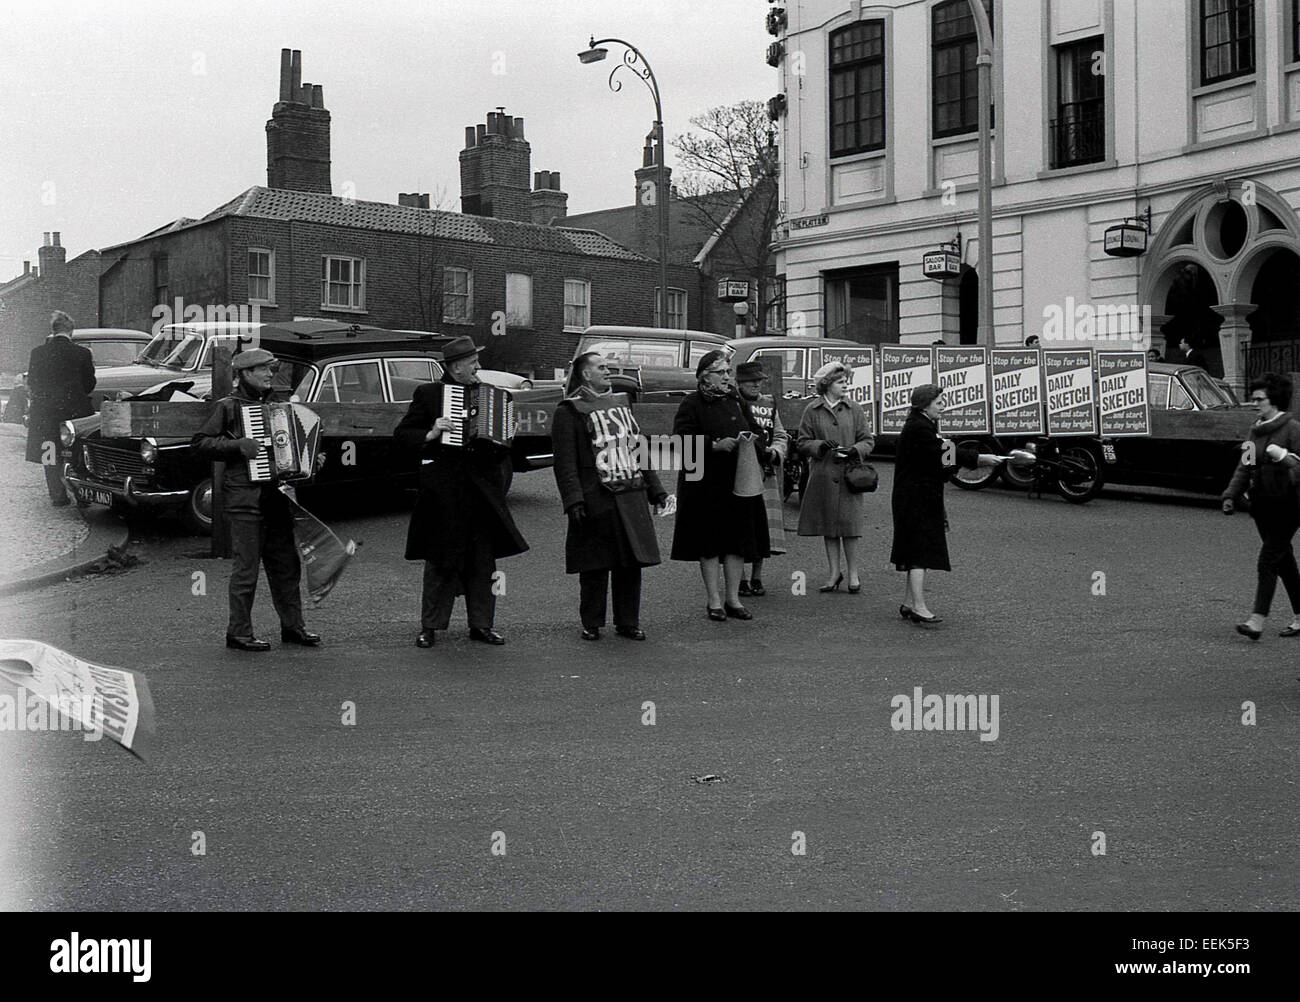 1950s historical picture showing a group of religious canvassers with signs at the start of the rowing race, the Oxford & Cambridge Boat Race, Putney, London. Stock Photo